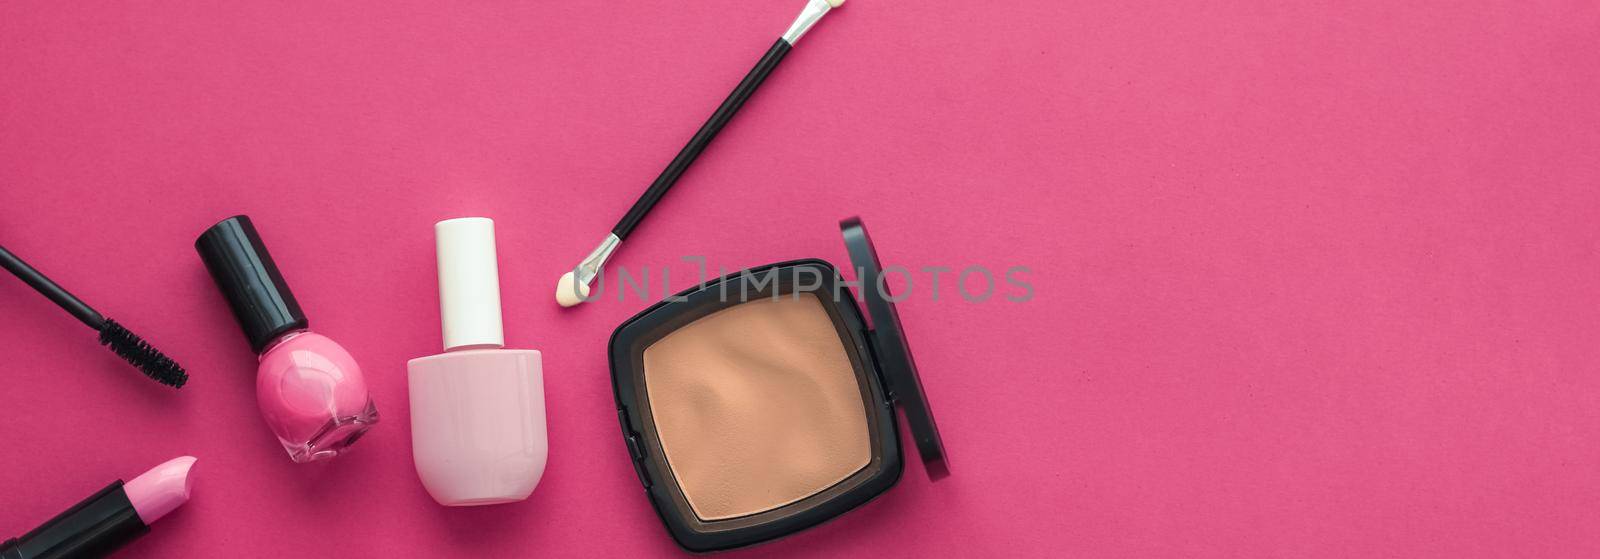 Cosmetic branding, fashion blog cover and girly glamour concept - Make-up and cosmetics product set for beauty brand Christmas sale promotion, luxury pink flatlay background as holiday design